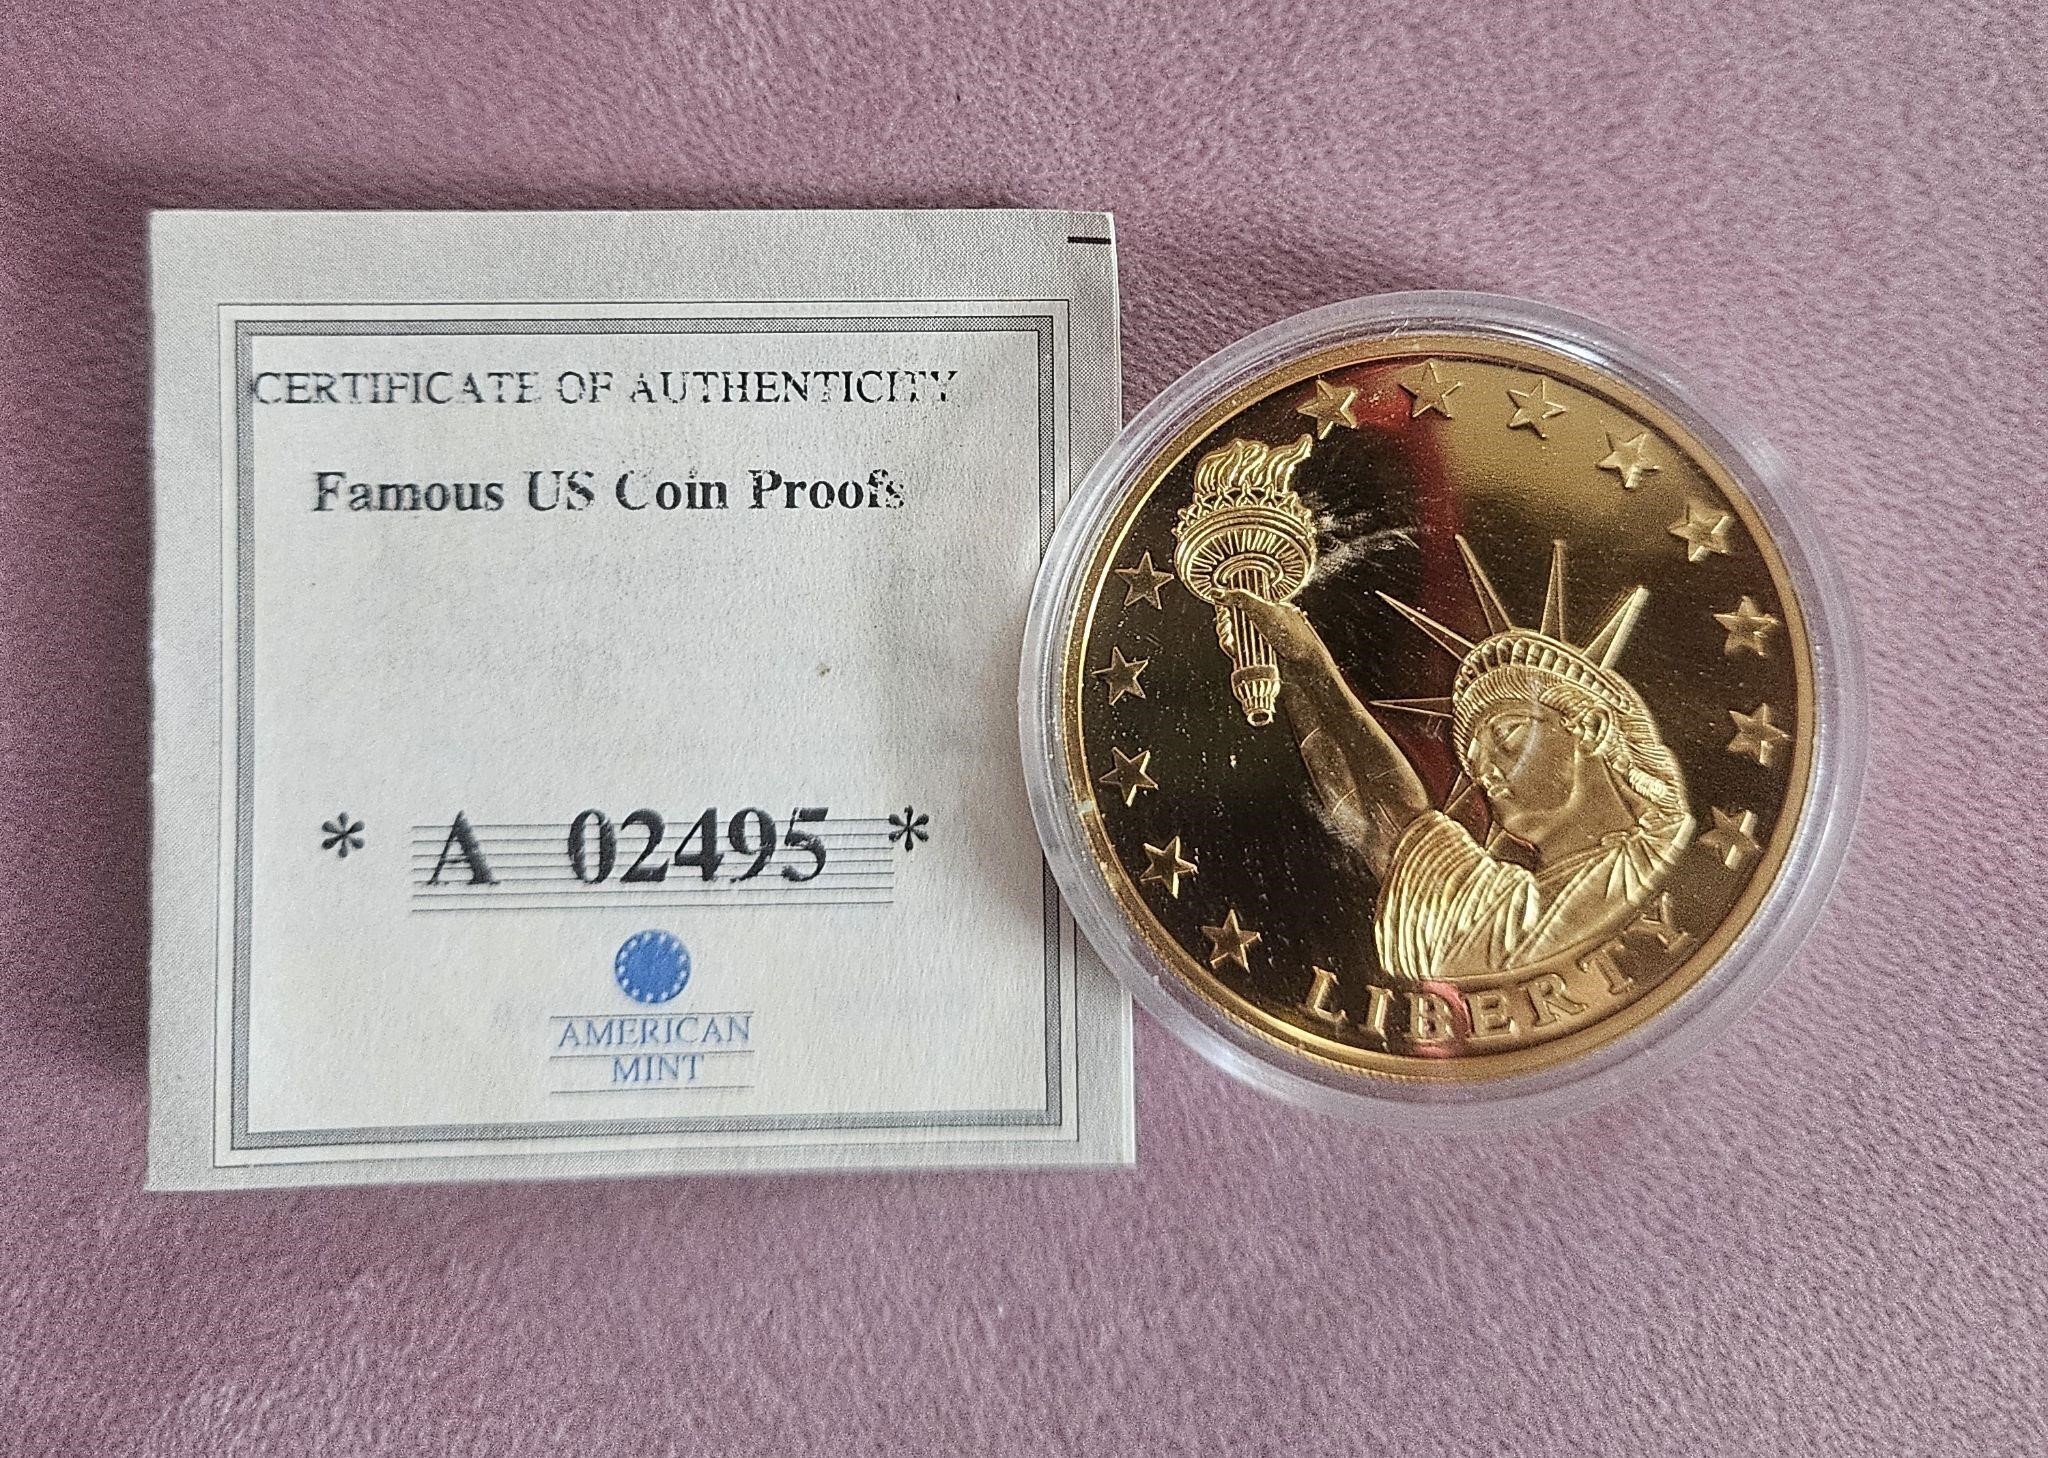 Famous US Coin Proof 1933 Gold Double Eagle Proof